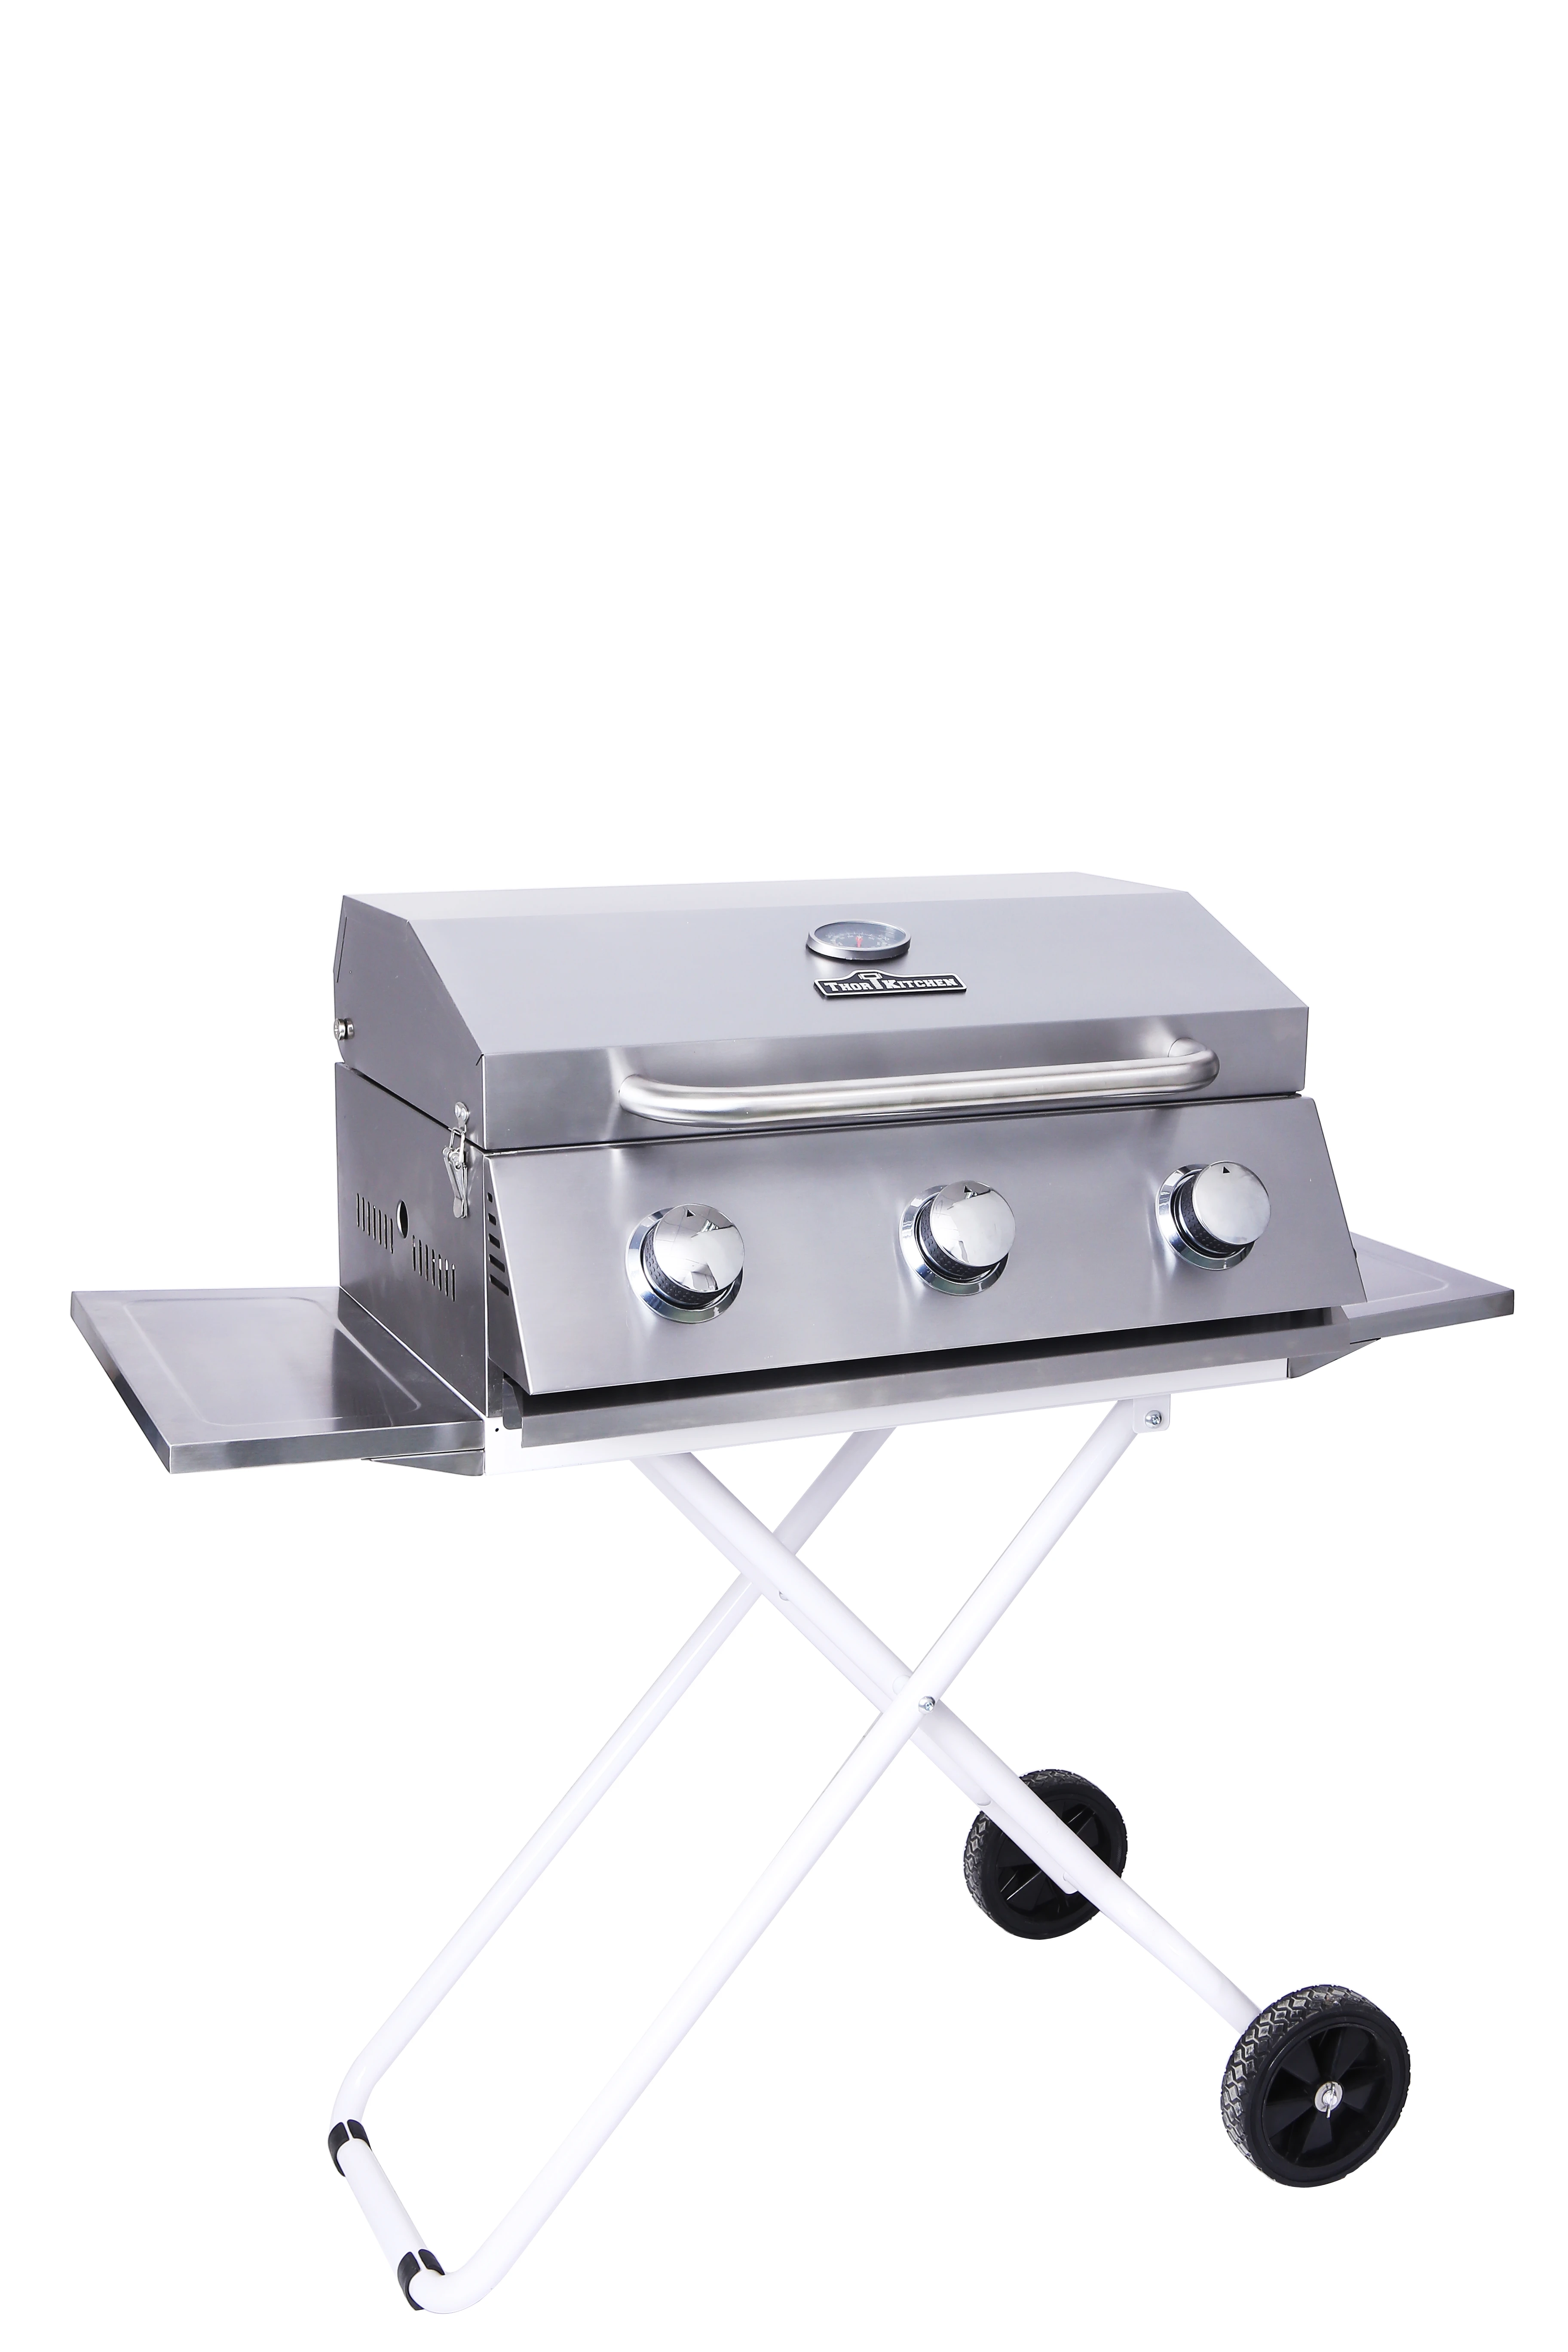 Foldable BBQ gril stainless steel gas barbeque cart cast iron bbq grill